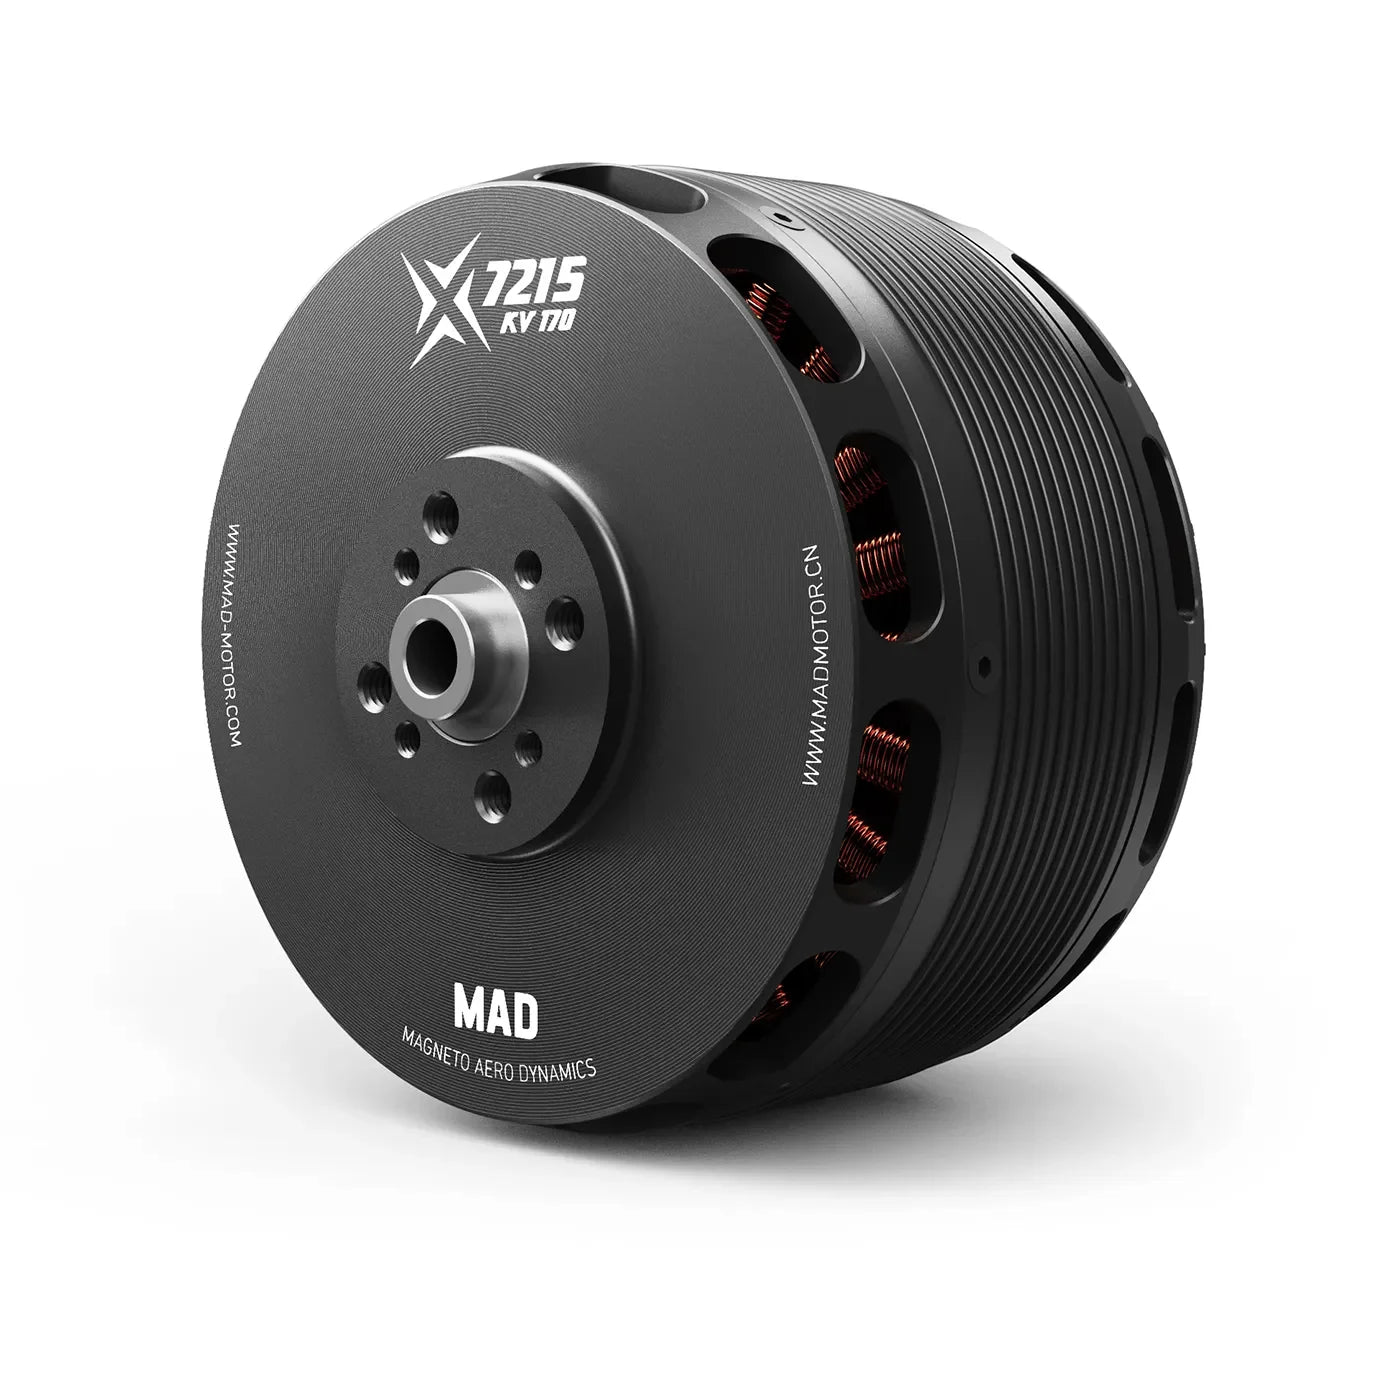 MAD X7215 VTOL Airplane Drone Motor - 220KV Brushless Motor Suitable for 120E-170E Aircraft,Corresponding to Gasoline Engine About 30-40CC